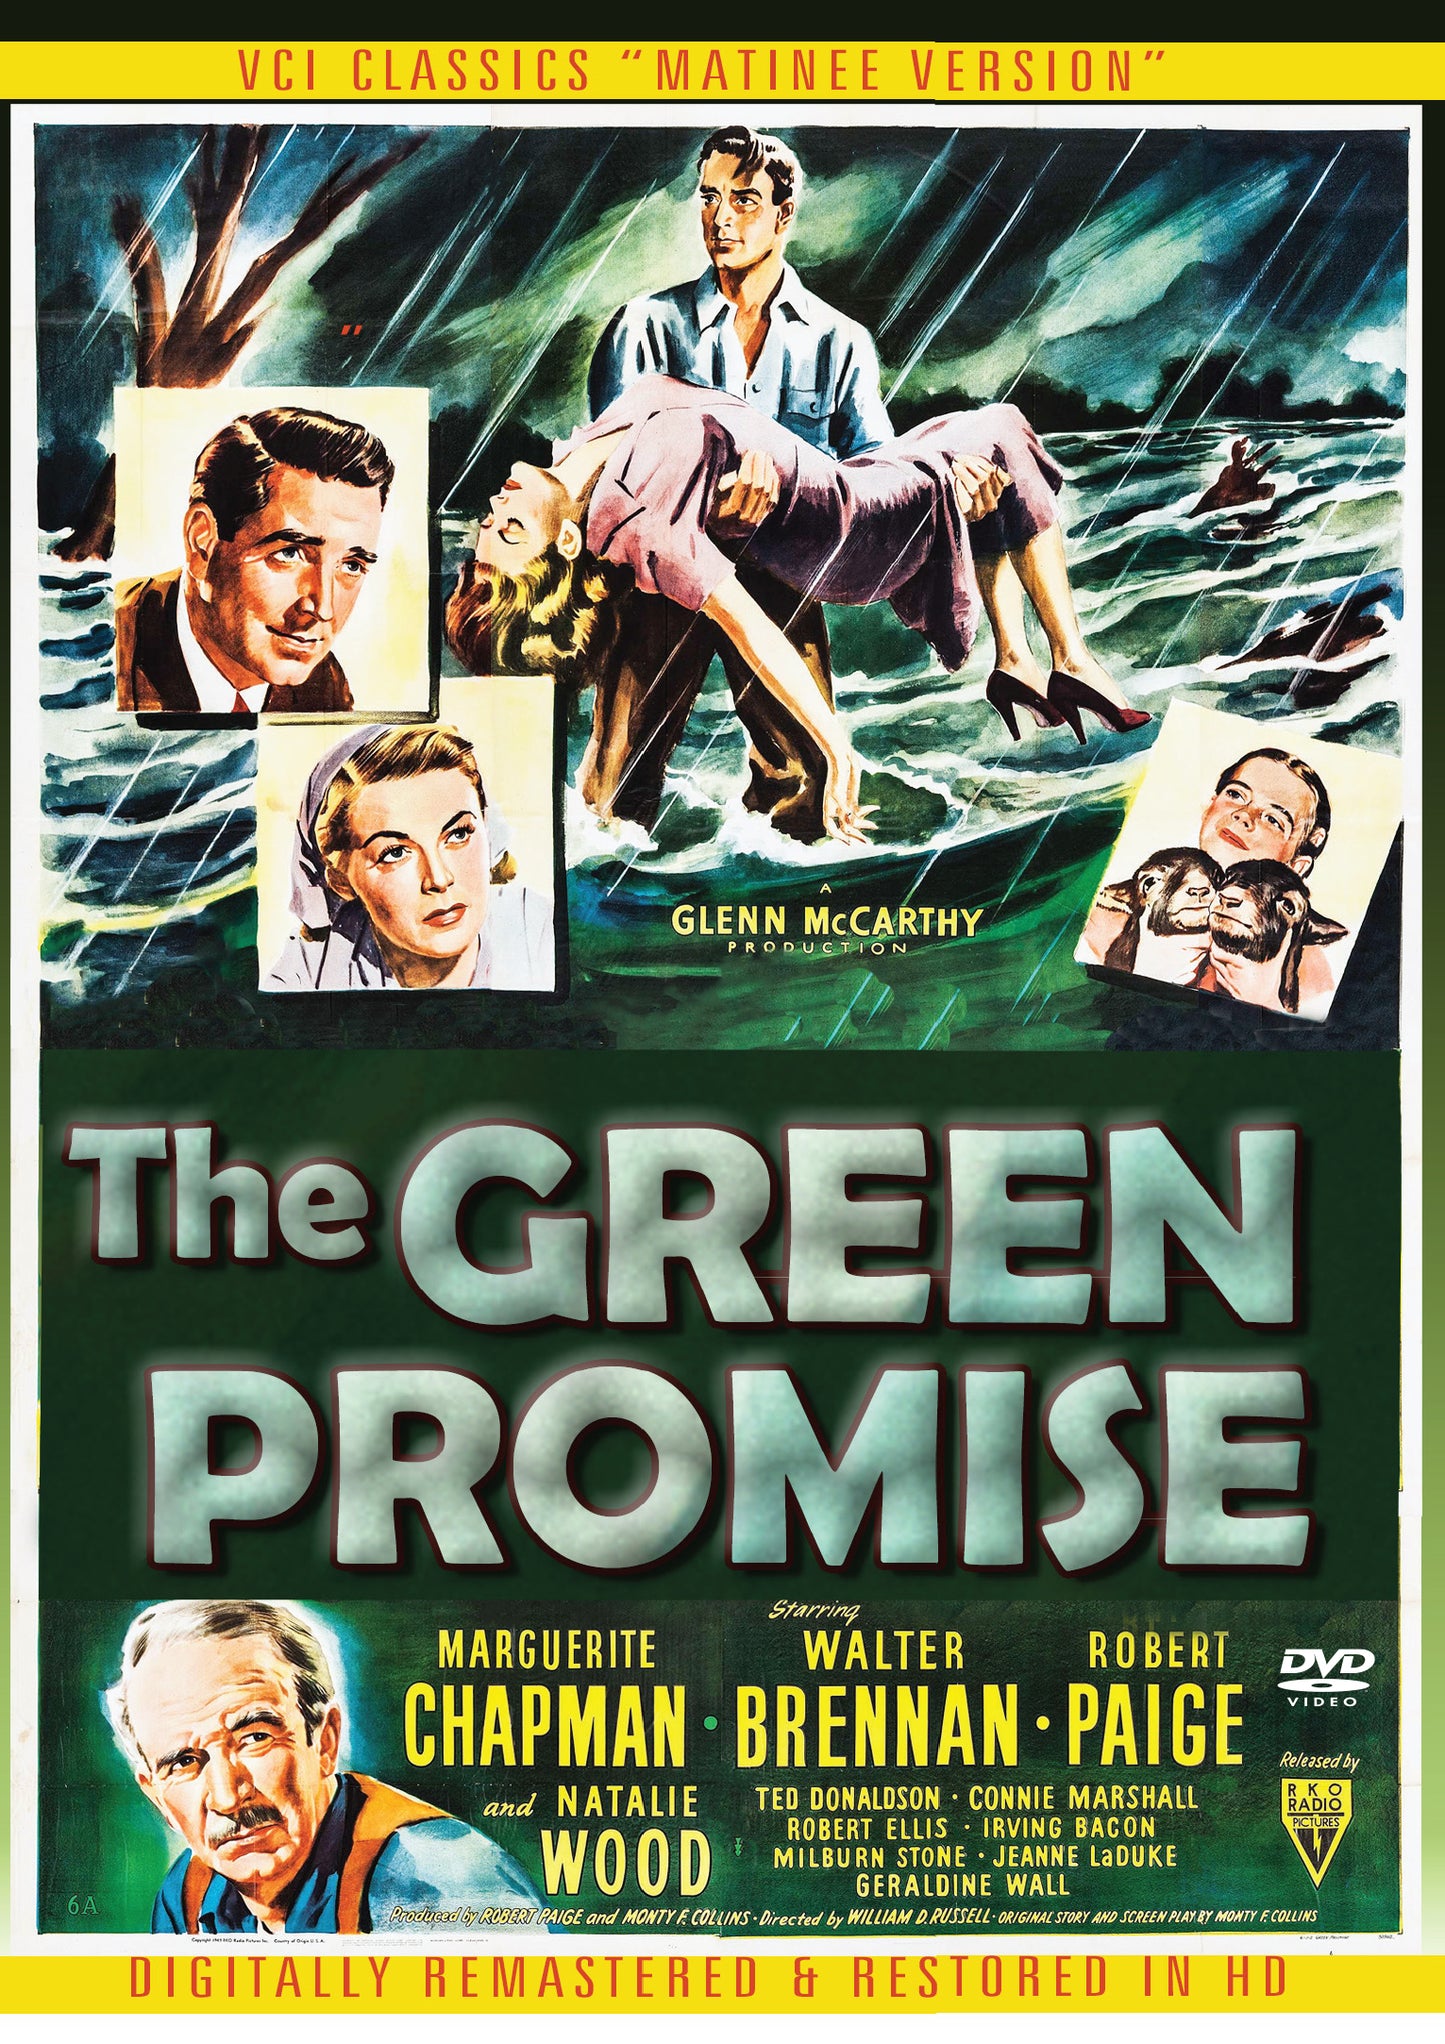 The Green Promise: Digitally Mastered & Restored In HD (DVD)